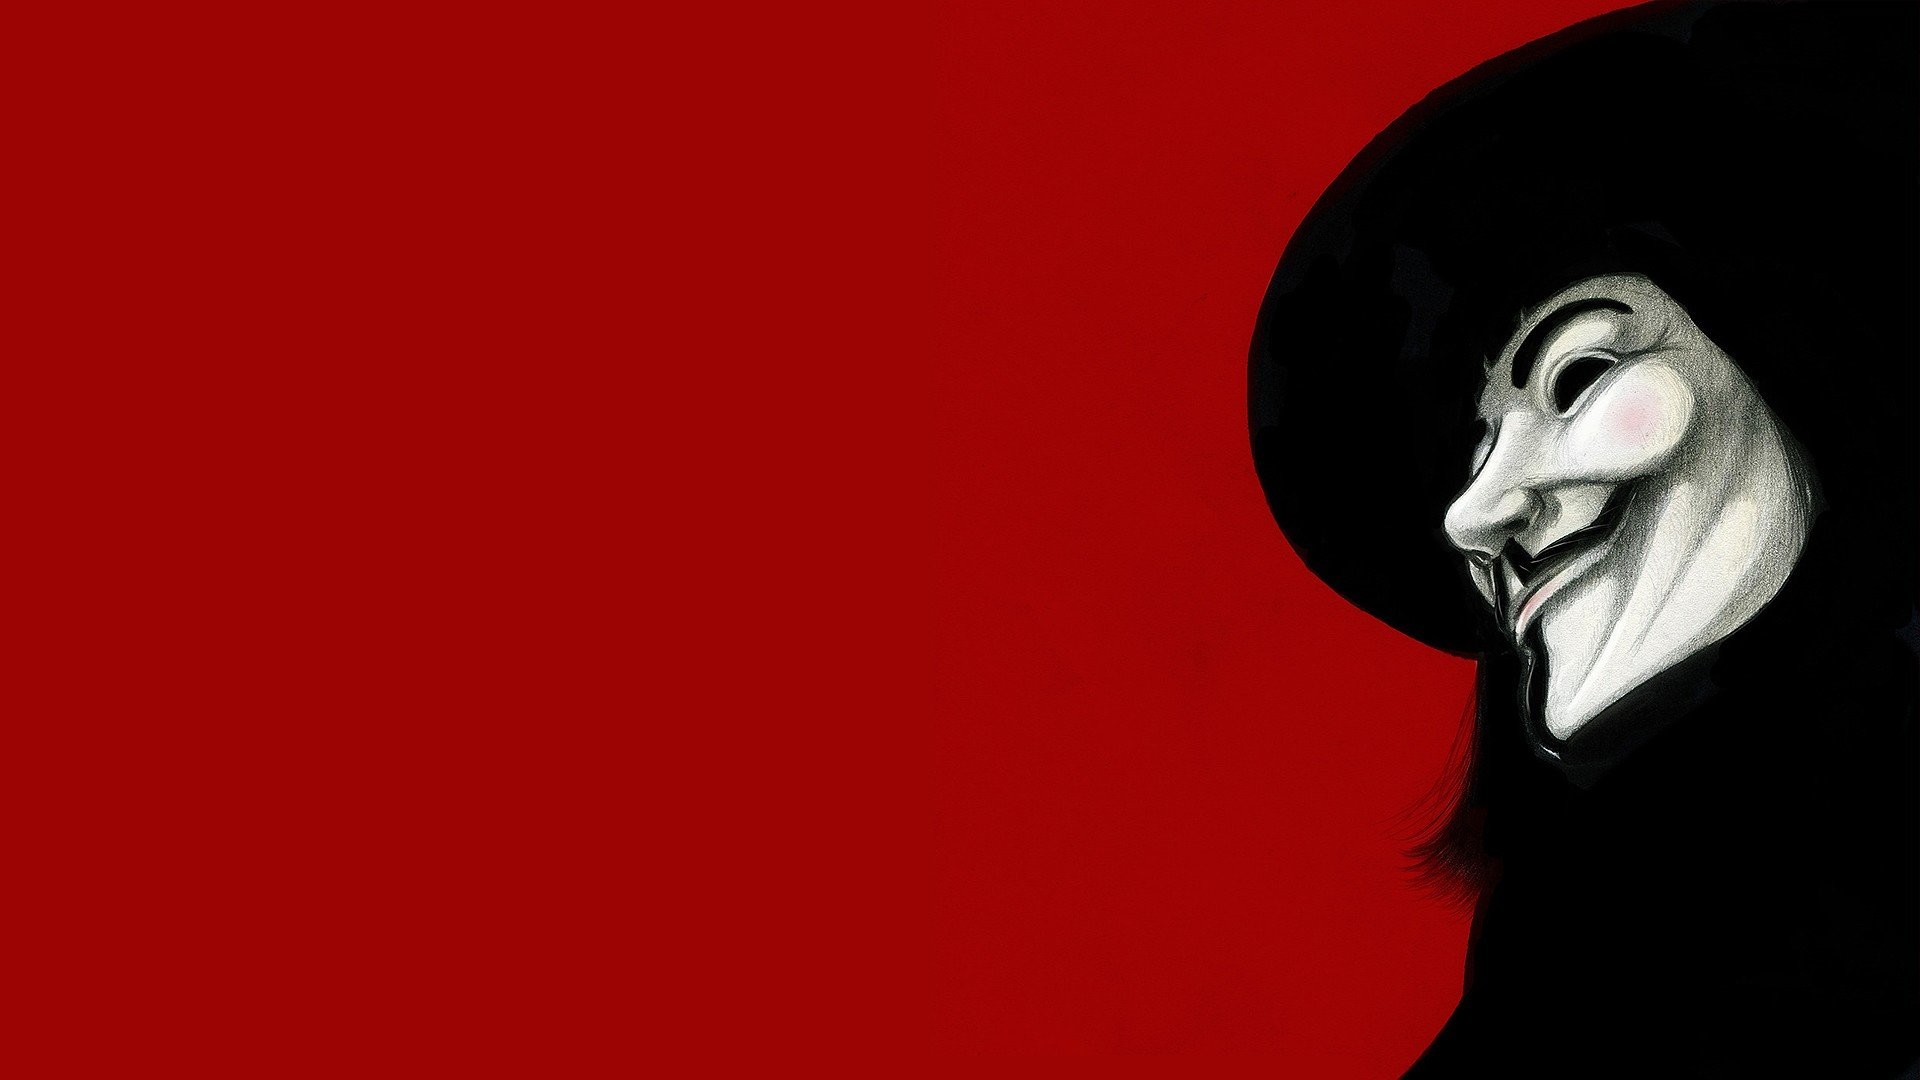 1920x1080 Movies Guy Fawkes V for Vendetta fan art red background wallpaper |   | 307595 | WallpaperUP